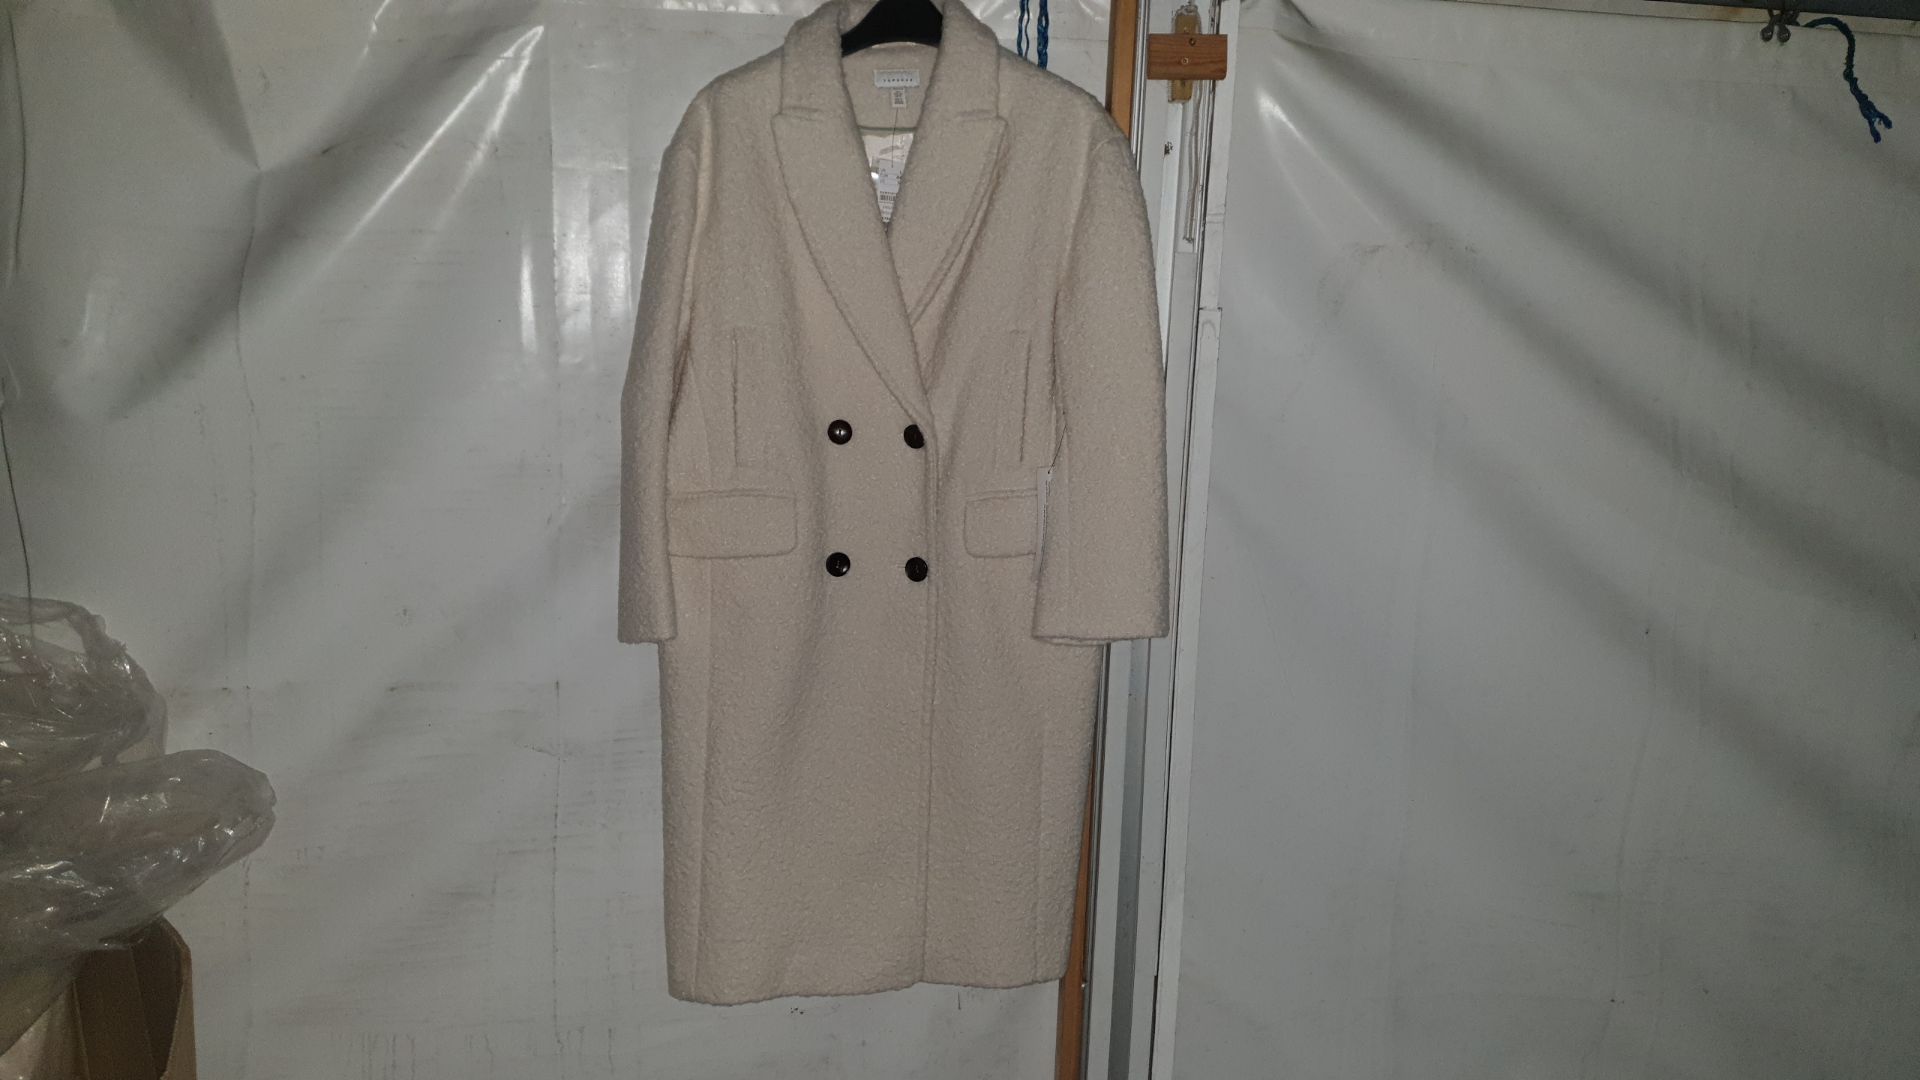 10 X BRAND NEW TOPSHOP WHITE/CREAM WOOL STYLED COATS RRP.PPC £79.00 UK SIZES S M L